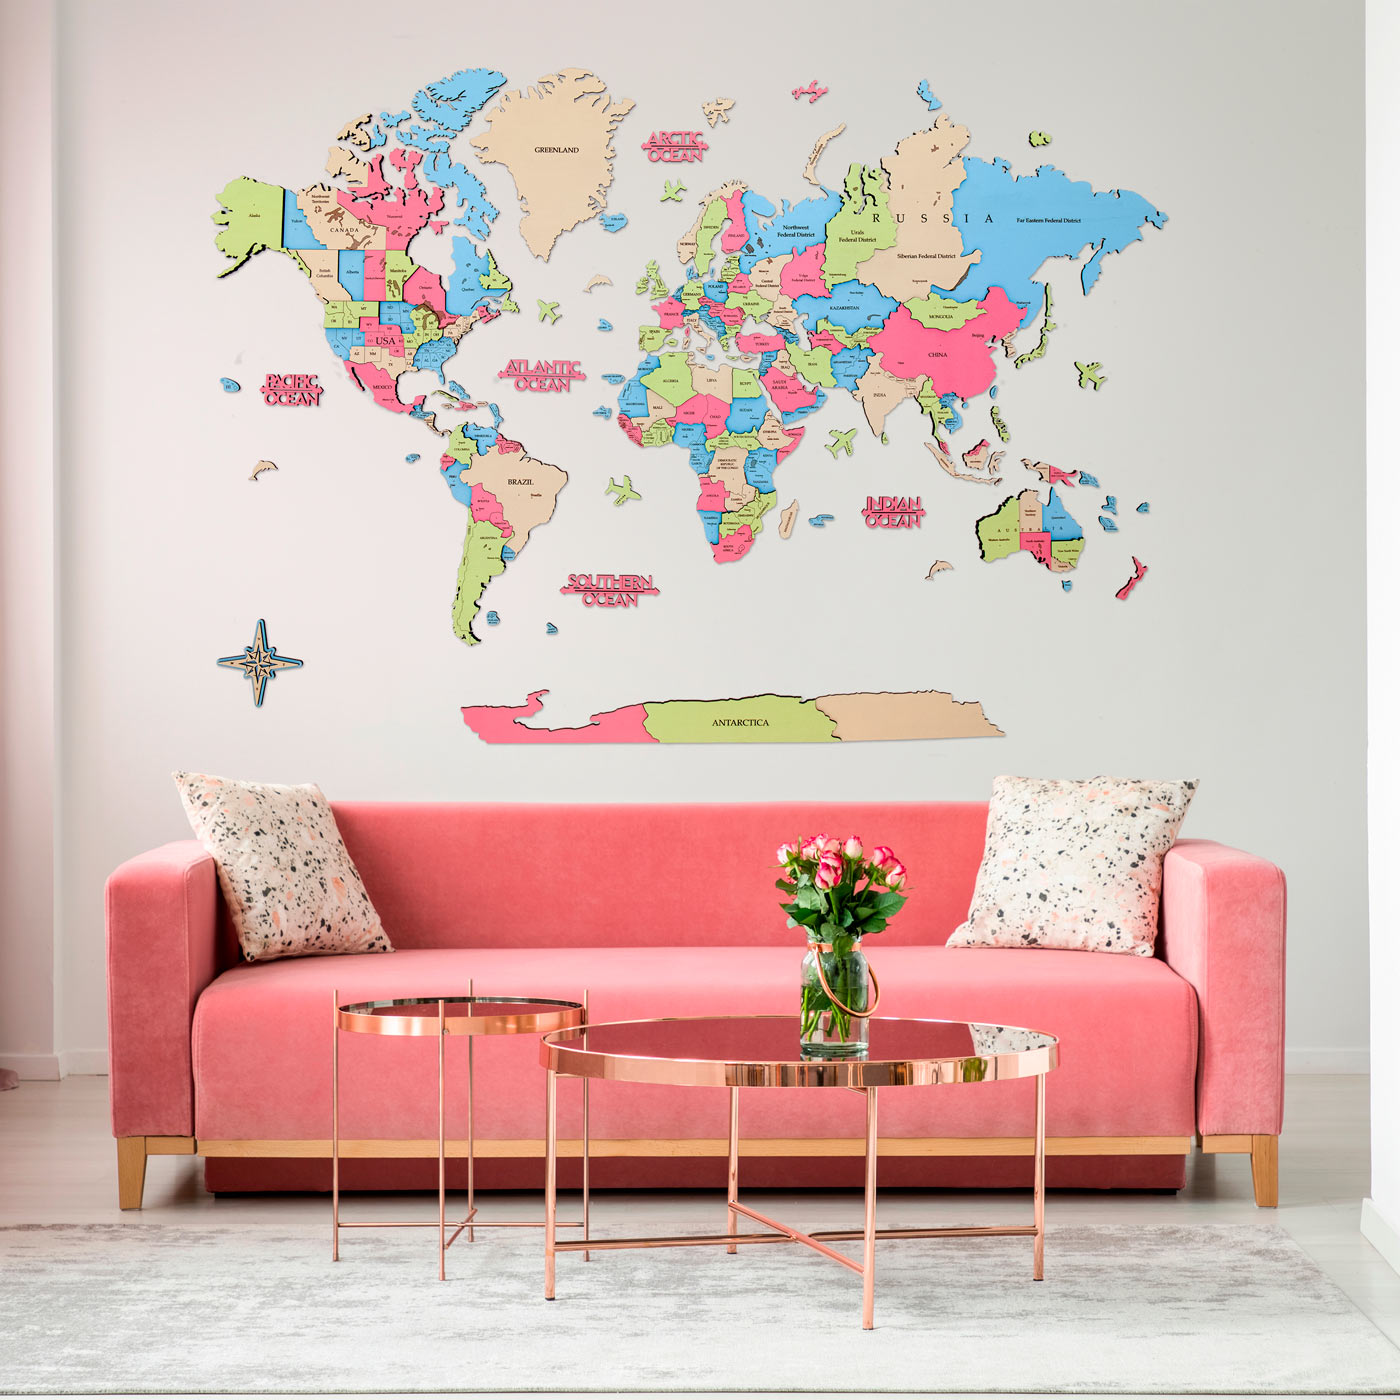 3d wooden world map. Wall wooden decor. Wooden world map in soft colors for kids. Ksilart